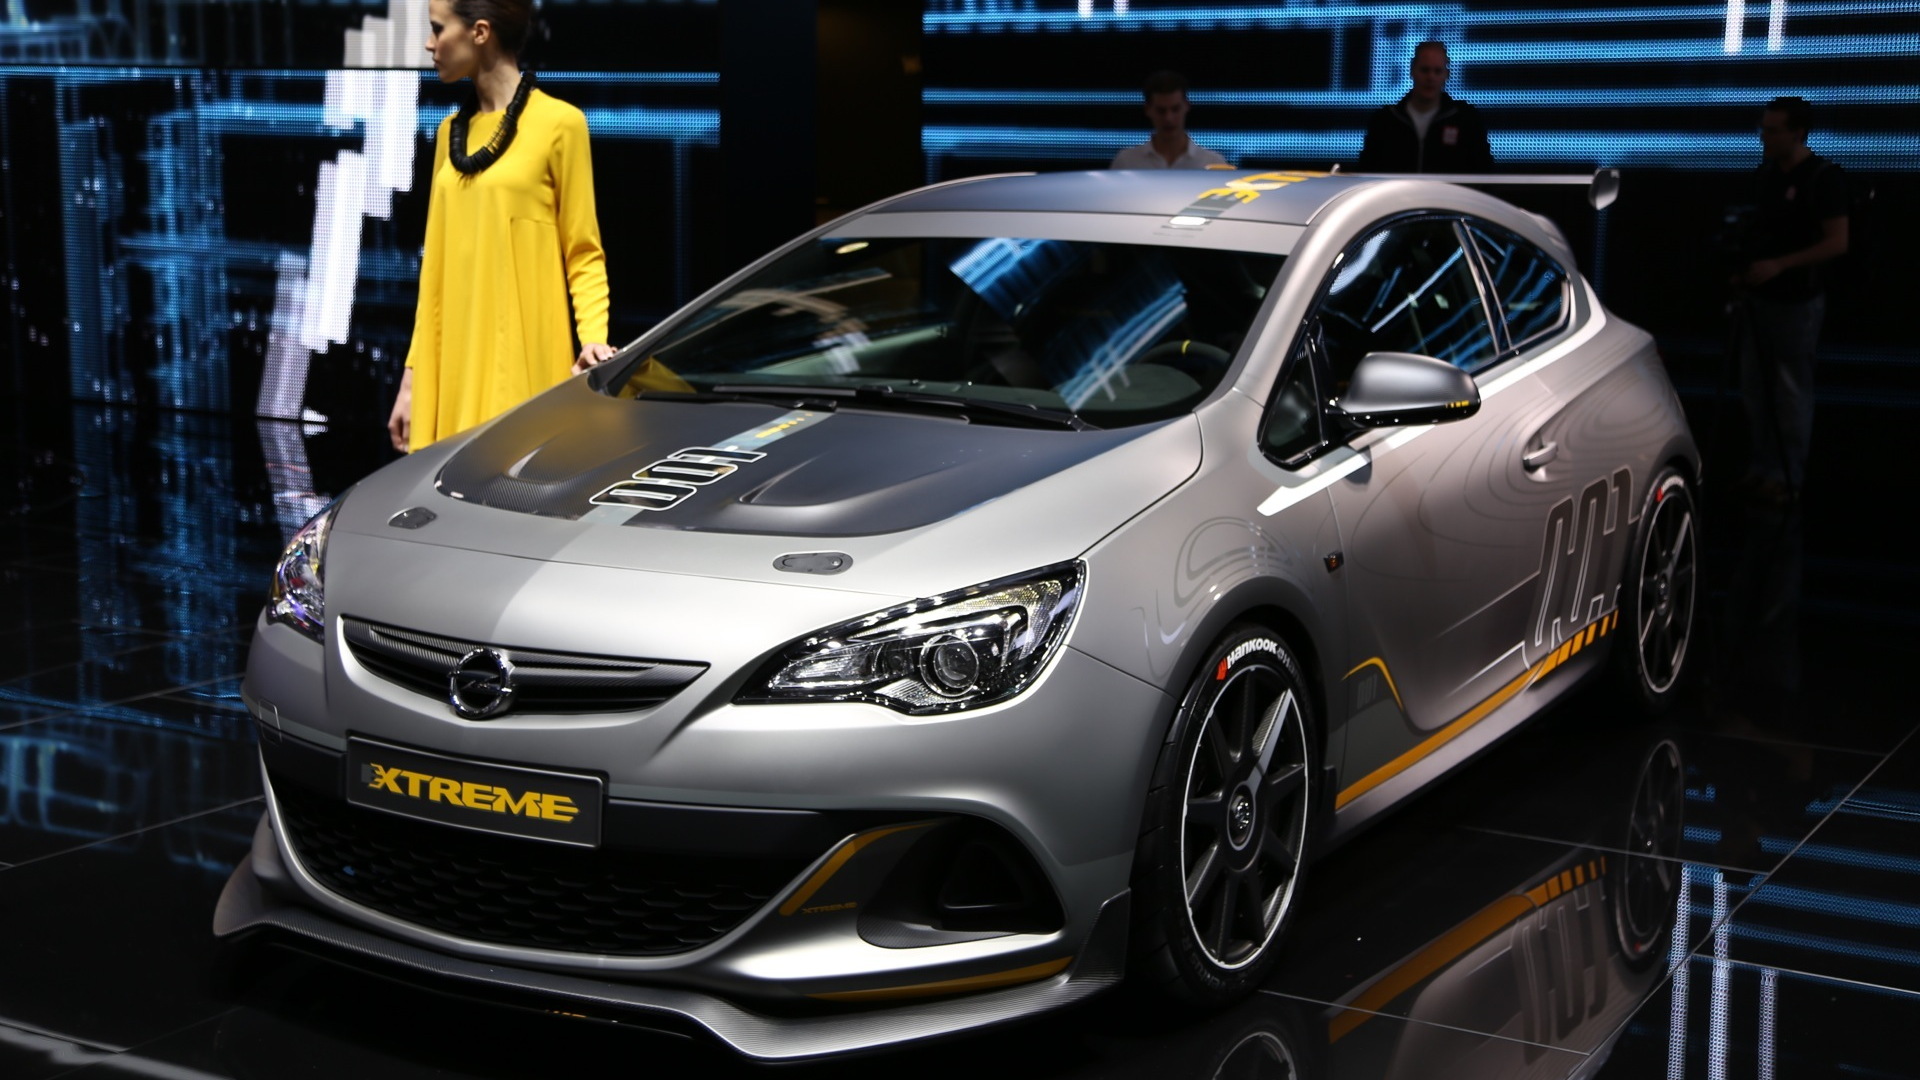 Opel Astra Opc Extreme Road Going Racer Live Photos And Video From Geneva